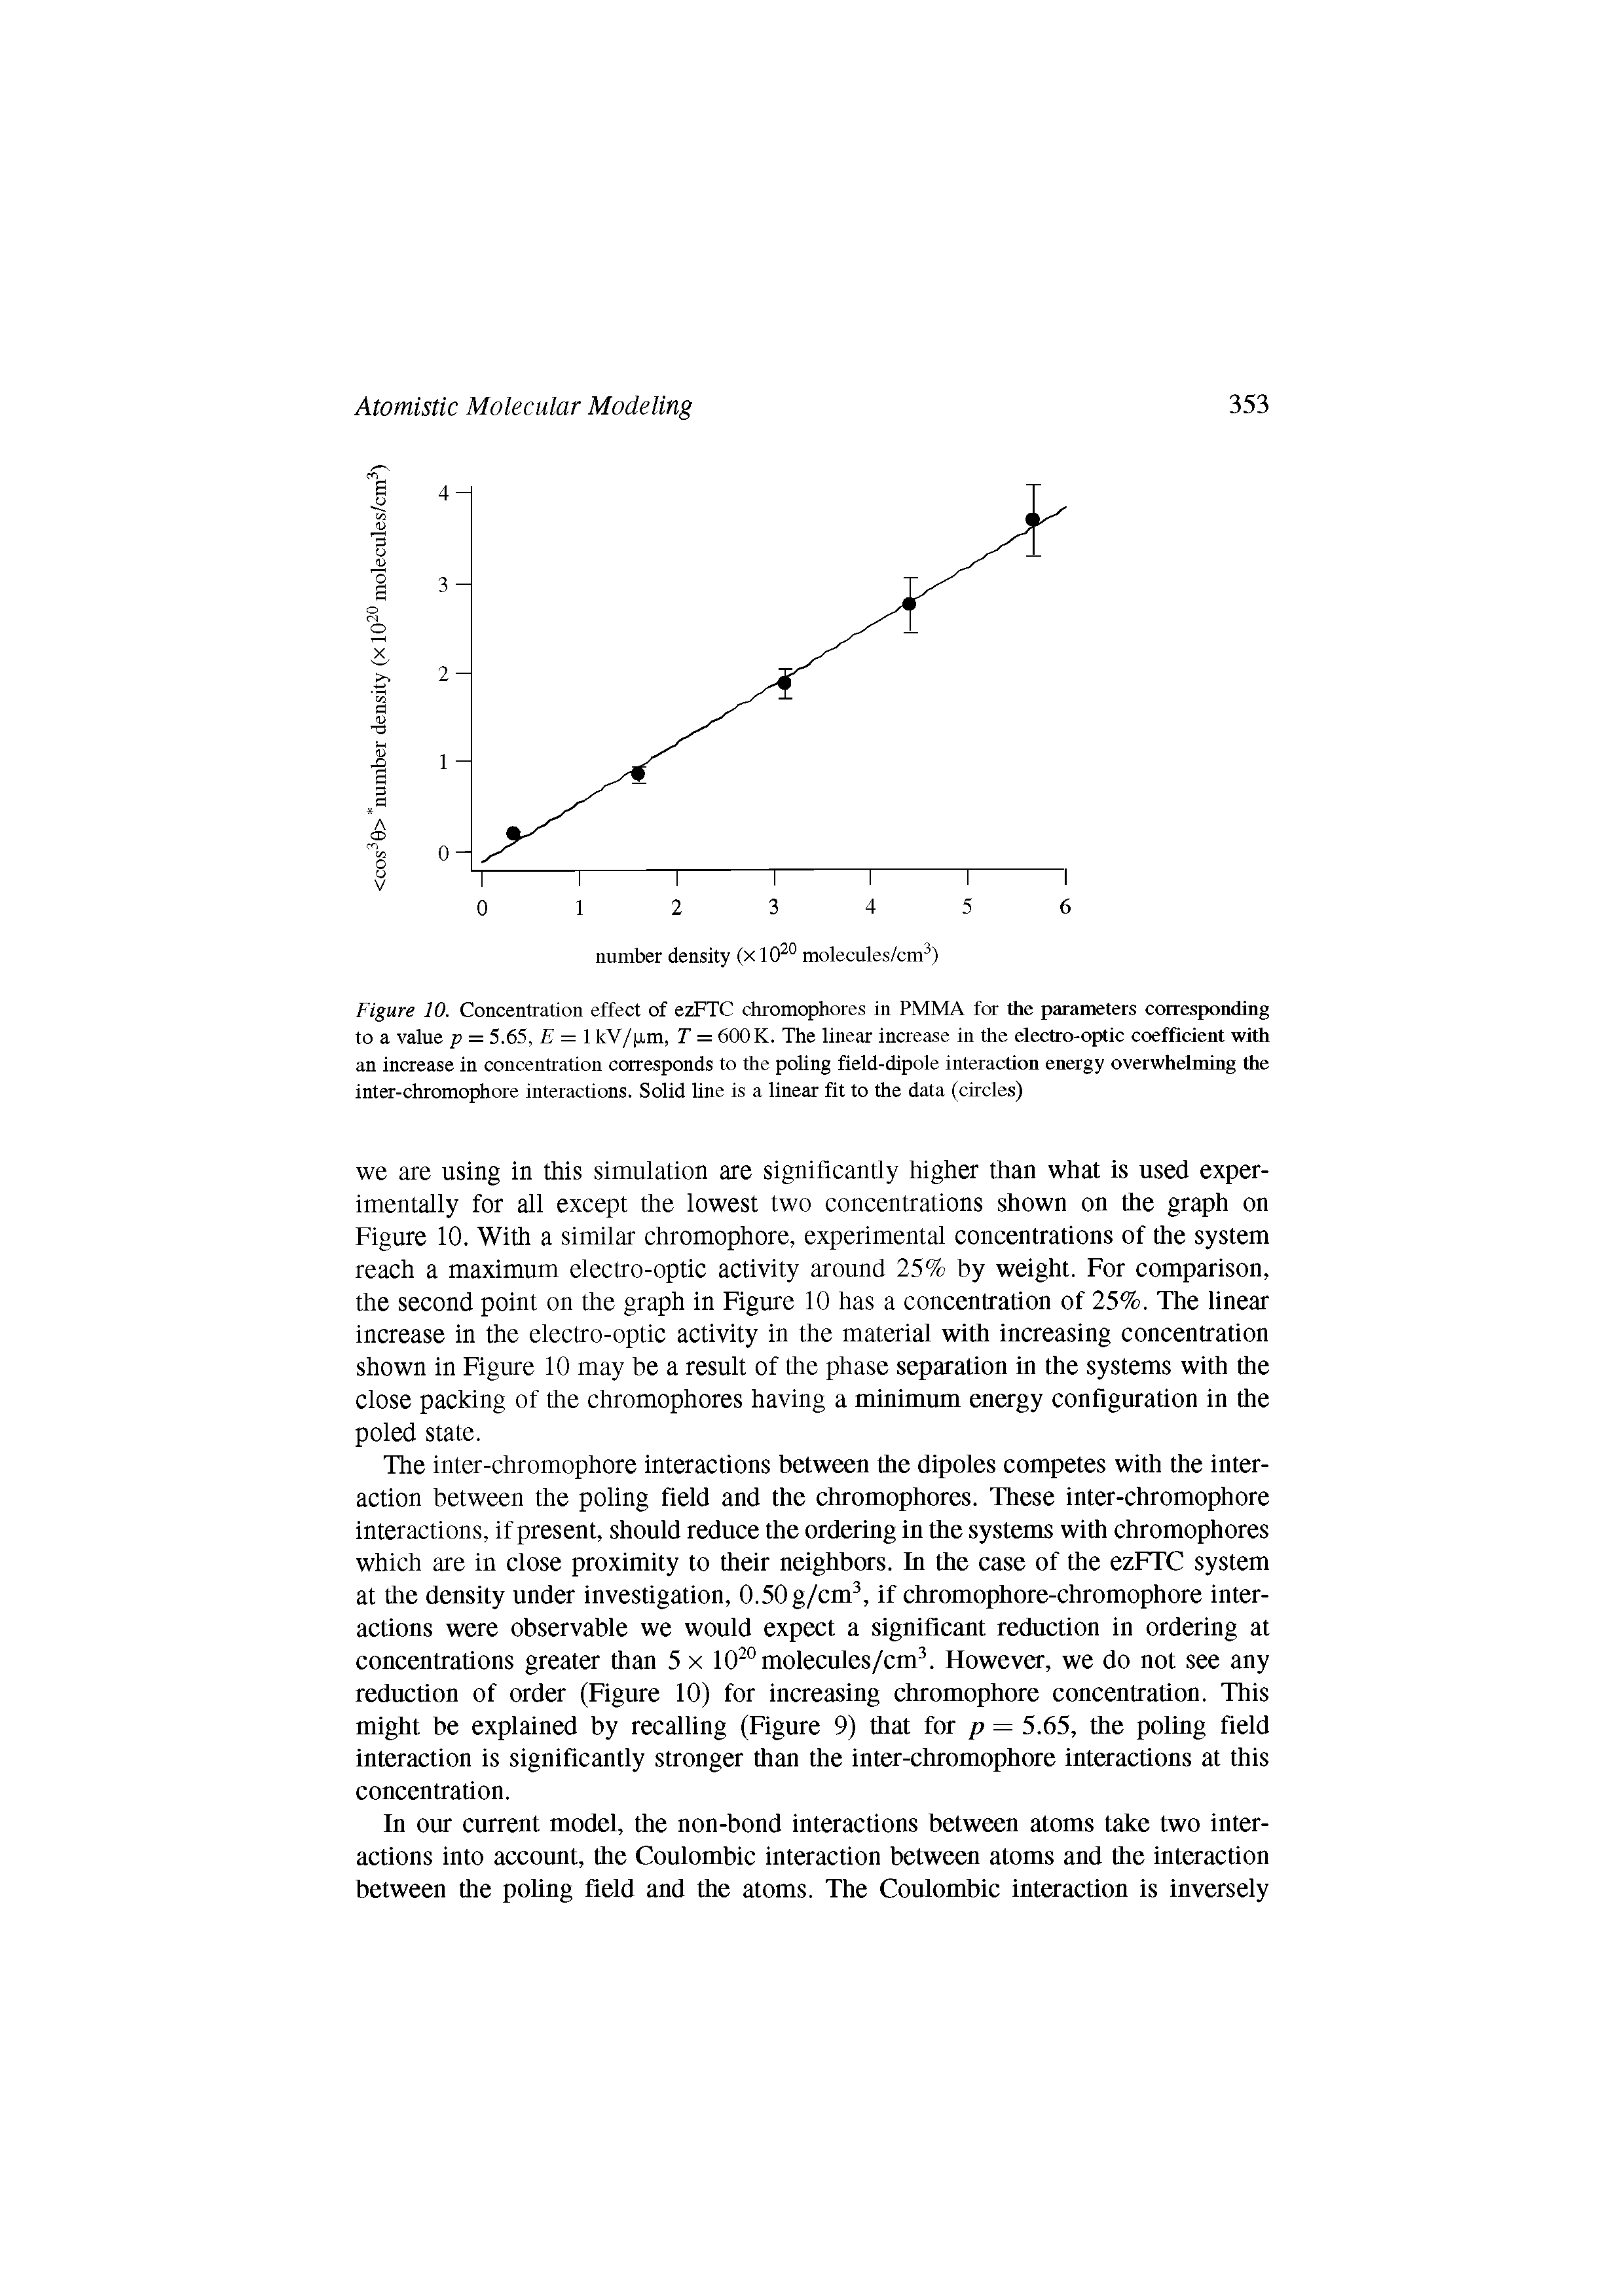 Figure 10. Concentration effect of ezFTC chromophores in PMMA for the parameters corresponding to a value p = 5.65, = 1 kV/pm, 7" = 600K. The linear increase in the electro-optic coefficient with an increase in concentration corresponds to the poling field-dipole interaction energy overwhelming the inter-chromophore interactions. Solid line is a linear fit to the data (circles)...